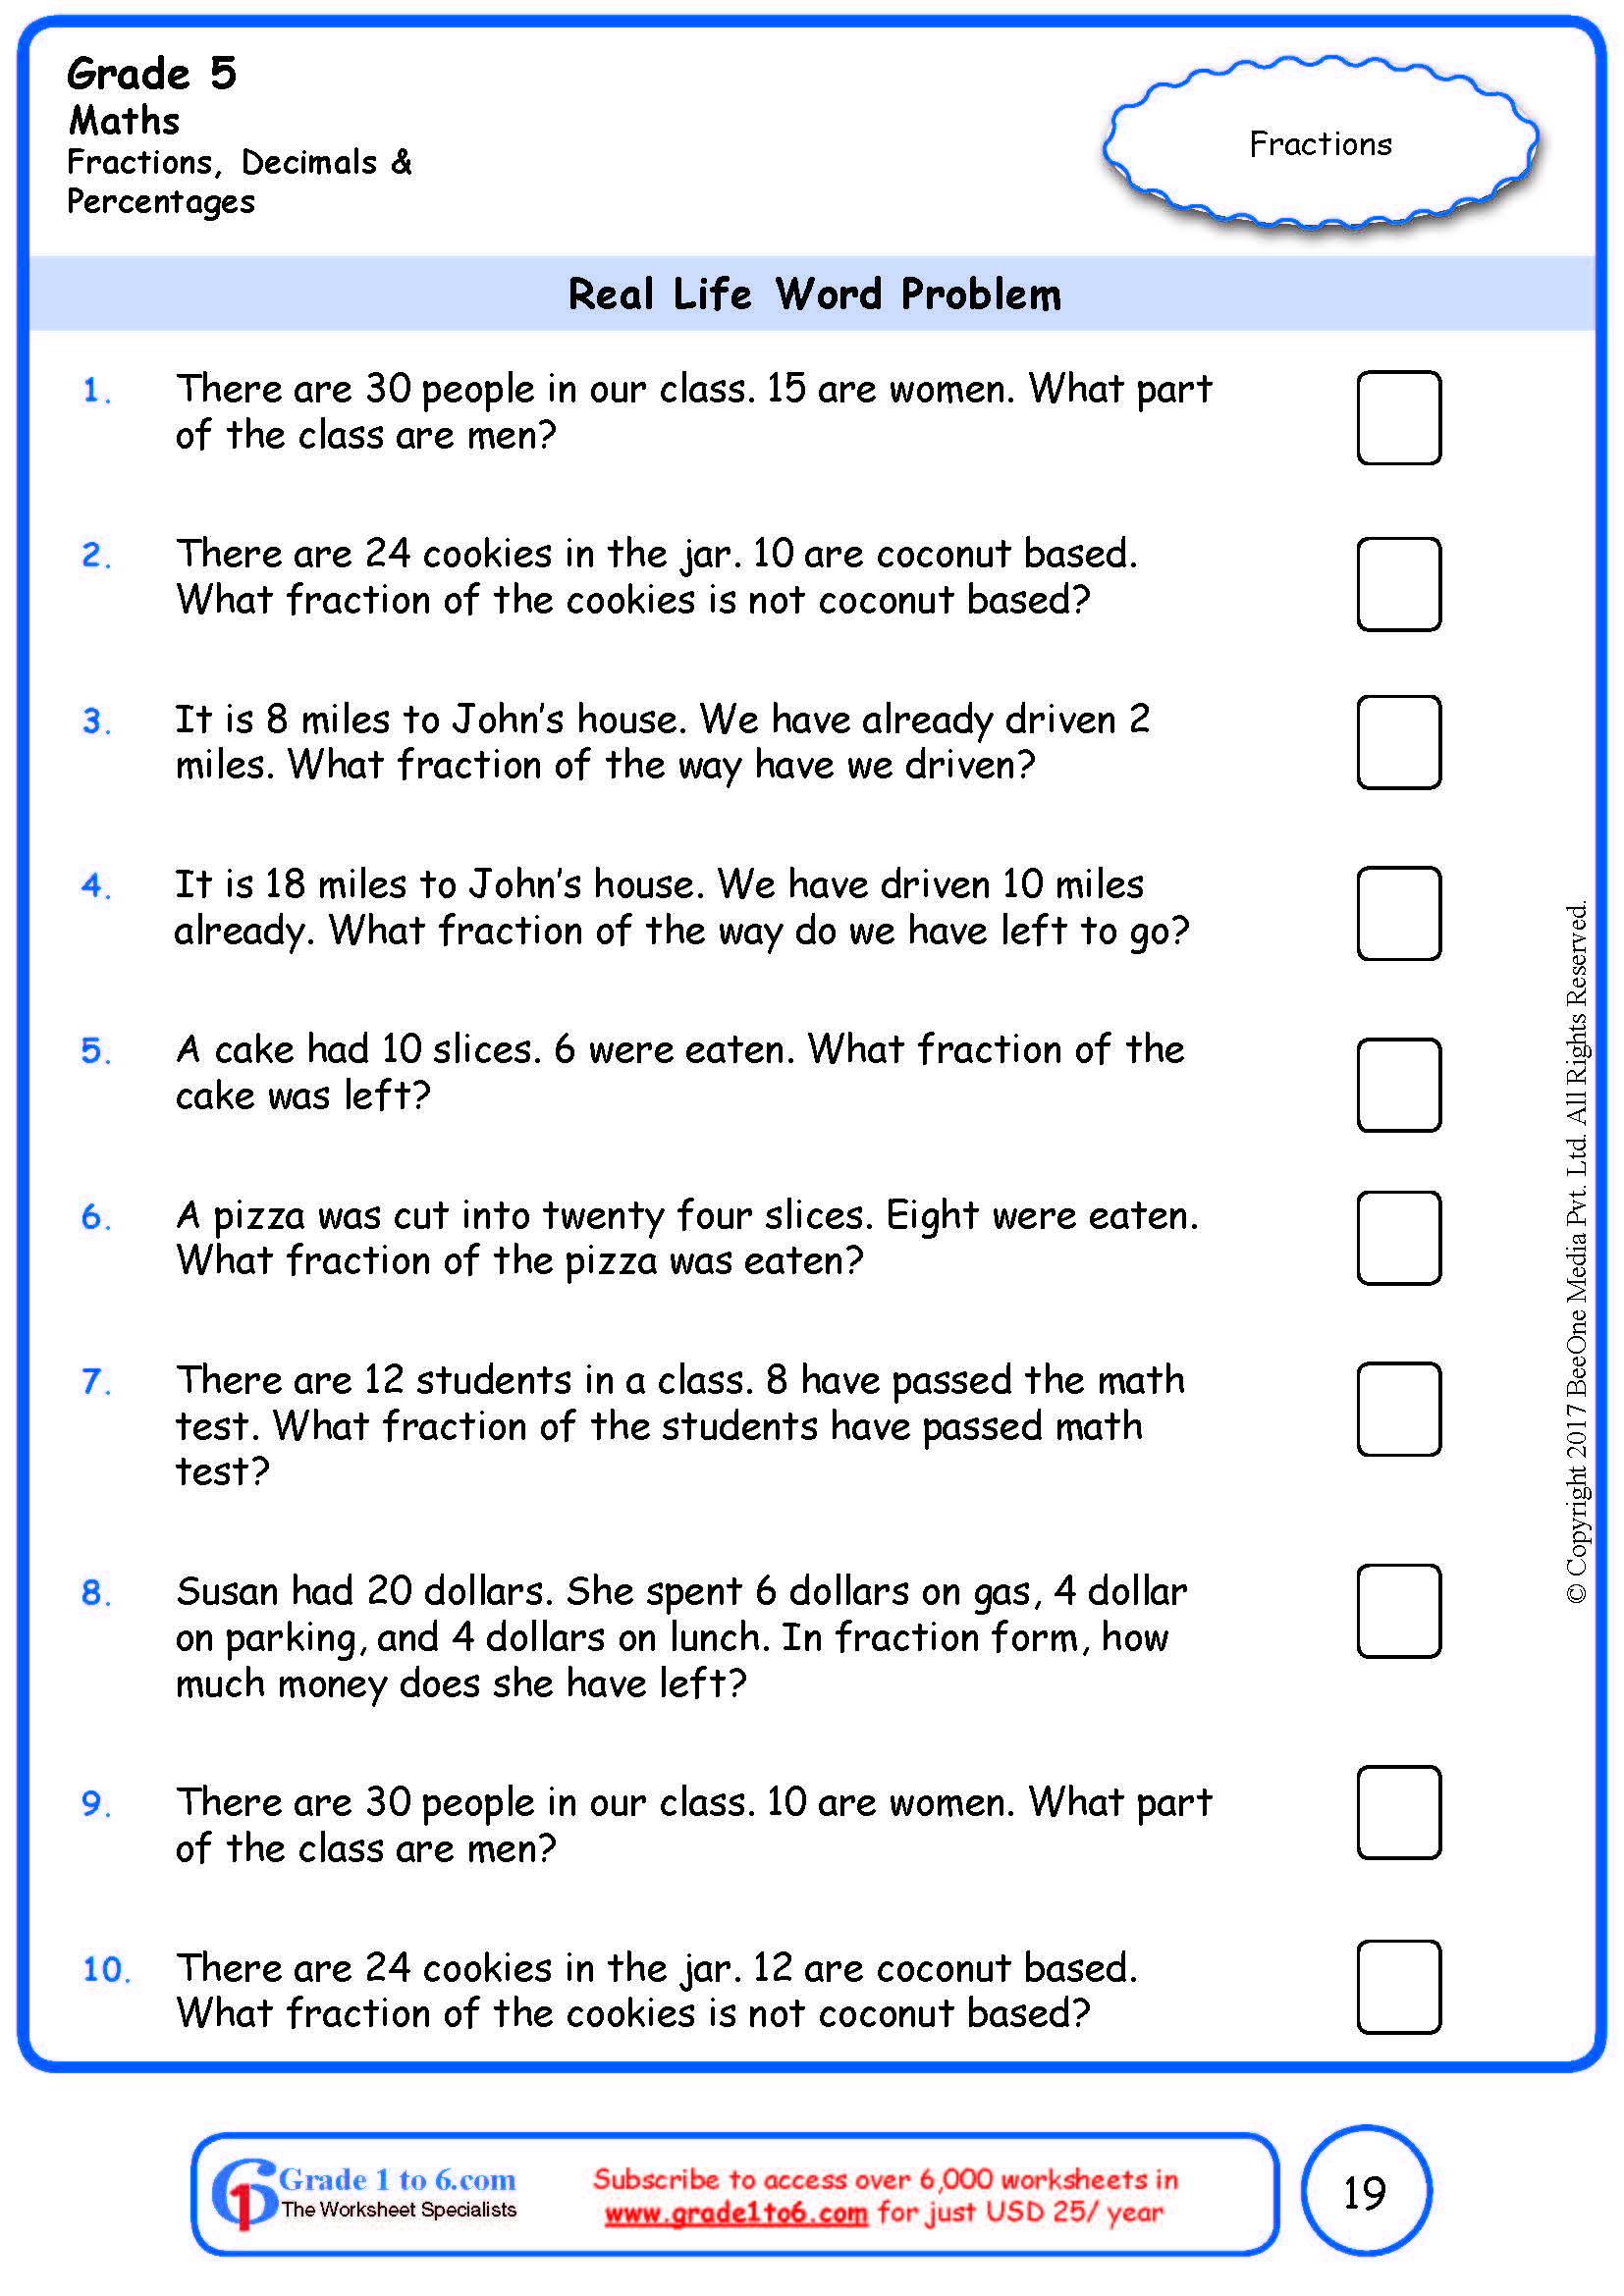 maths-worksheets-for-grade-1-word-problems-high-quality-maths-worksheets-for-children-ages-5